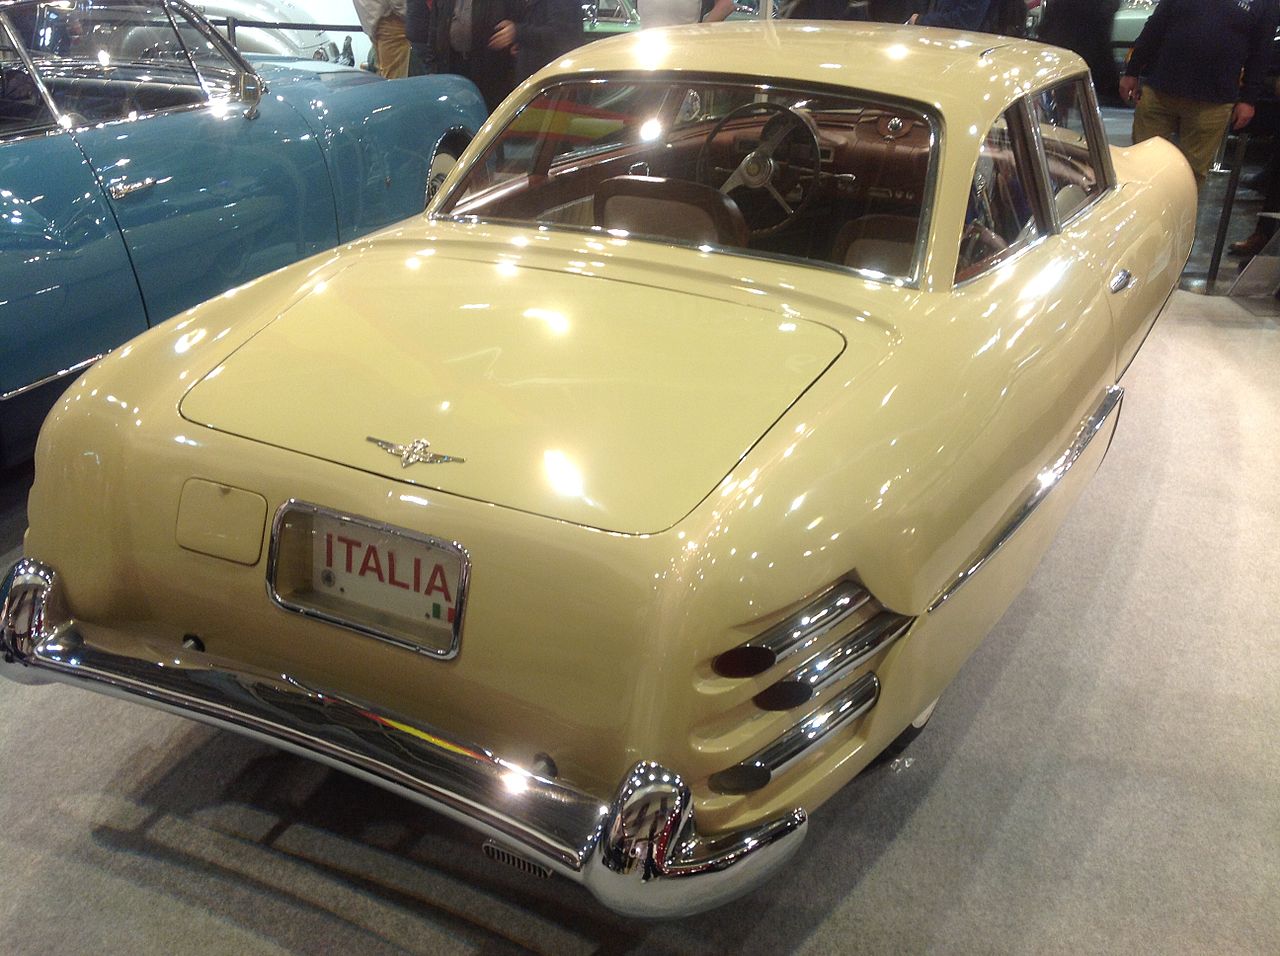 Image of Hudson Italia coupe by Carrozzeria Touring of Milan (26121336900)